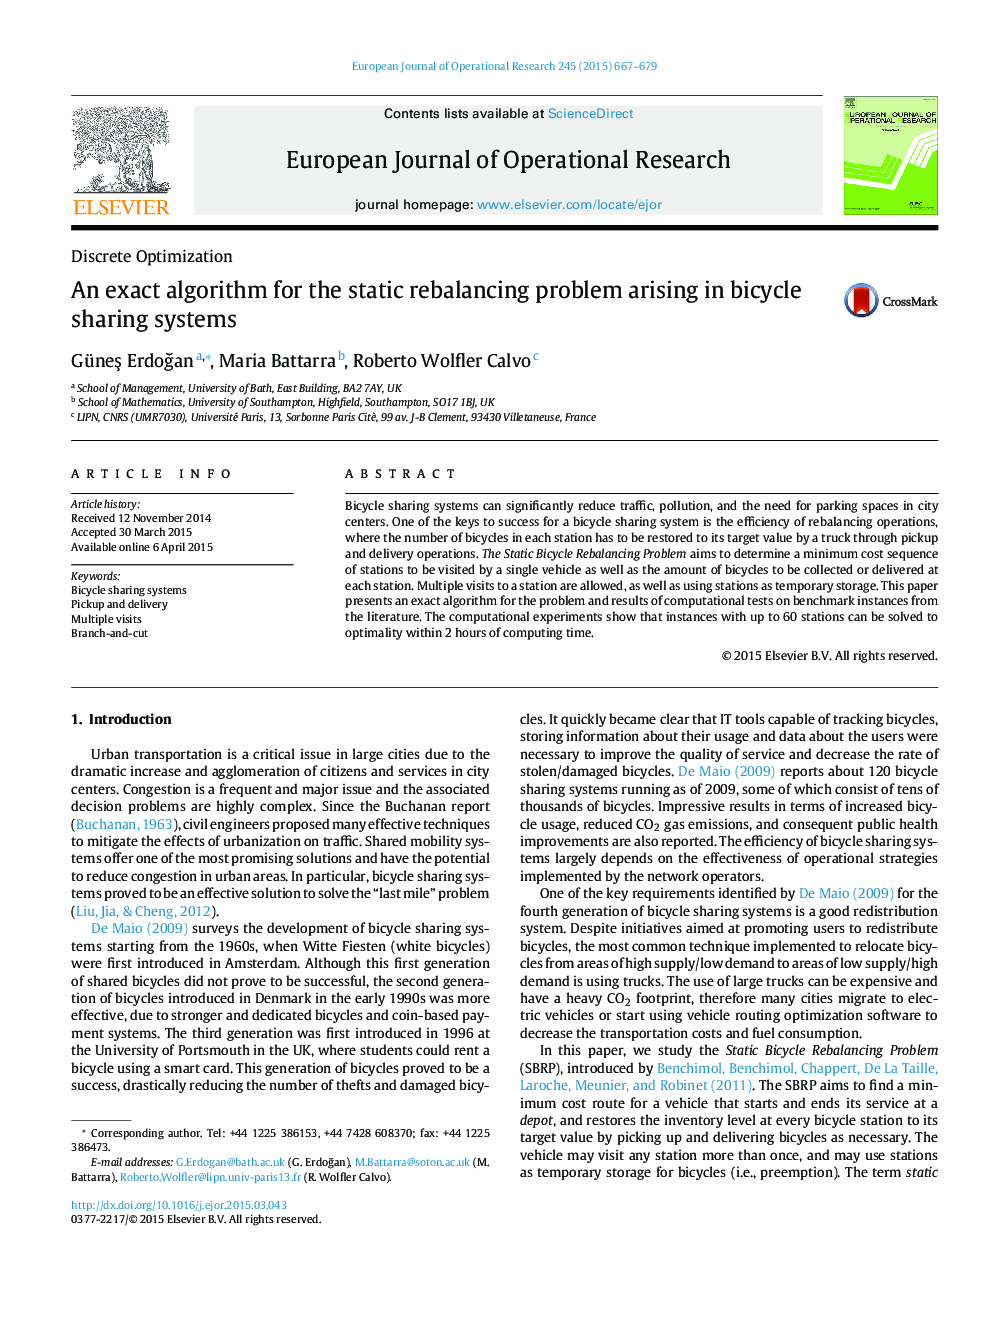 An exact algorithm for the static rebalancing problem arising in bicycle sharing systems